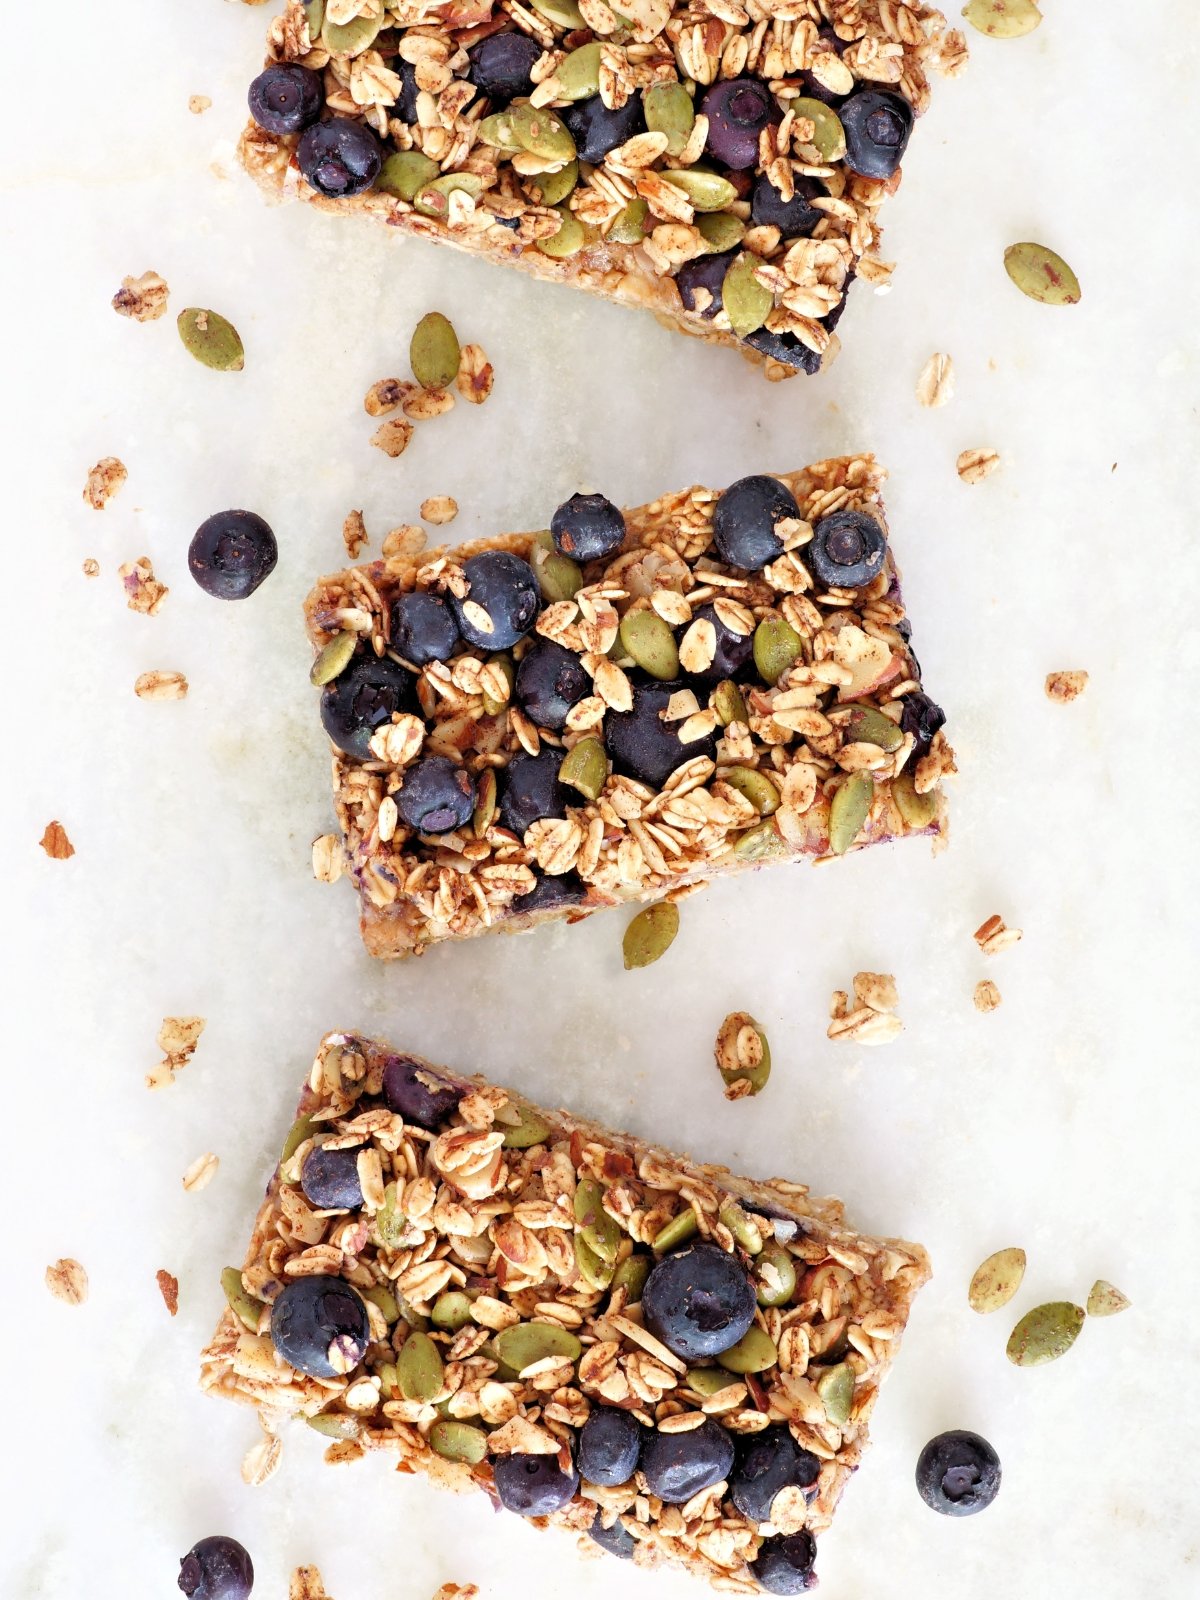 Granola and blueberry snack bars